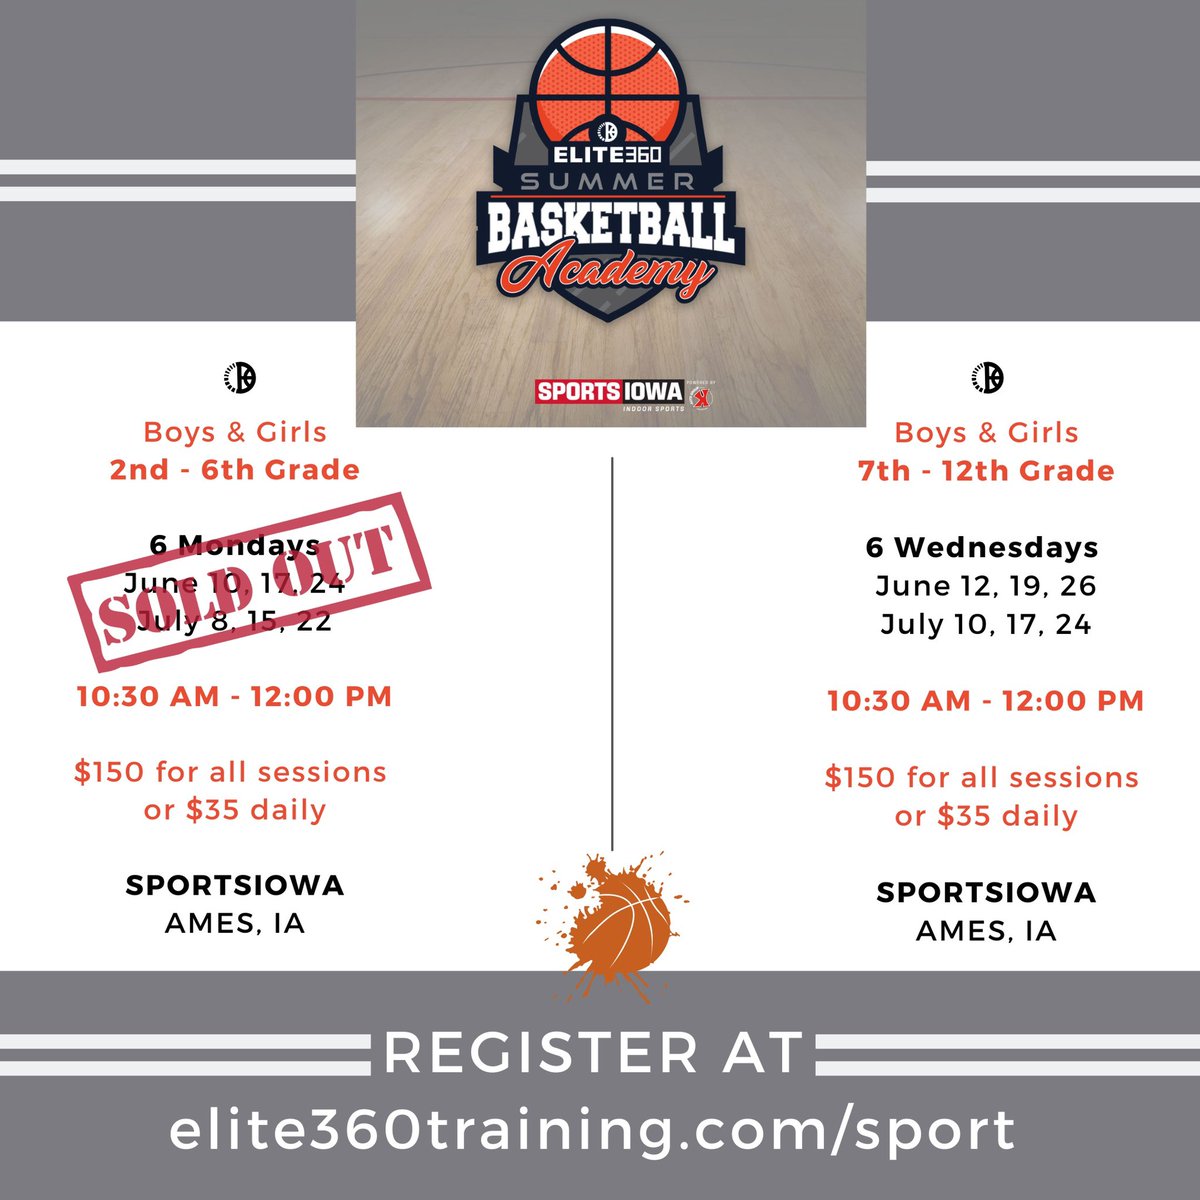 Summer Basketball Academy starts in just a few short weeks! 🏀 ￼ While our Mon. session is full, you can still grab a spot(s) in our Wed. sessions. 2nd - 6th graders can join Wed. also, we group athletes by grade for training. ￼ Register SOON! ➡️ elite360training.com/sport